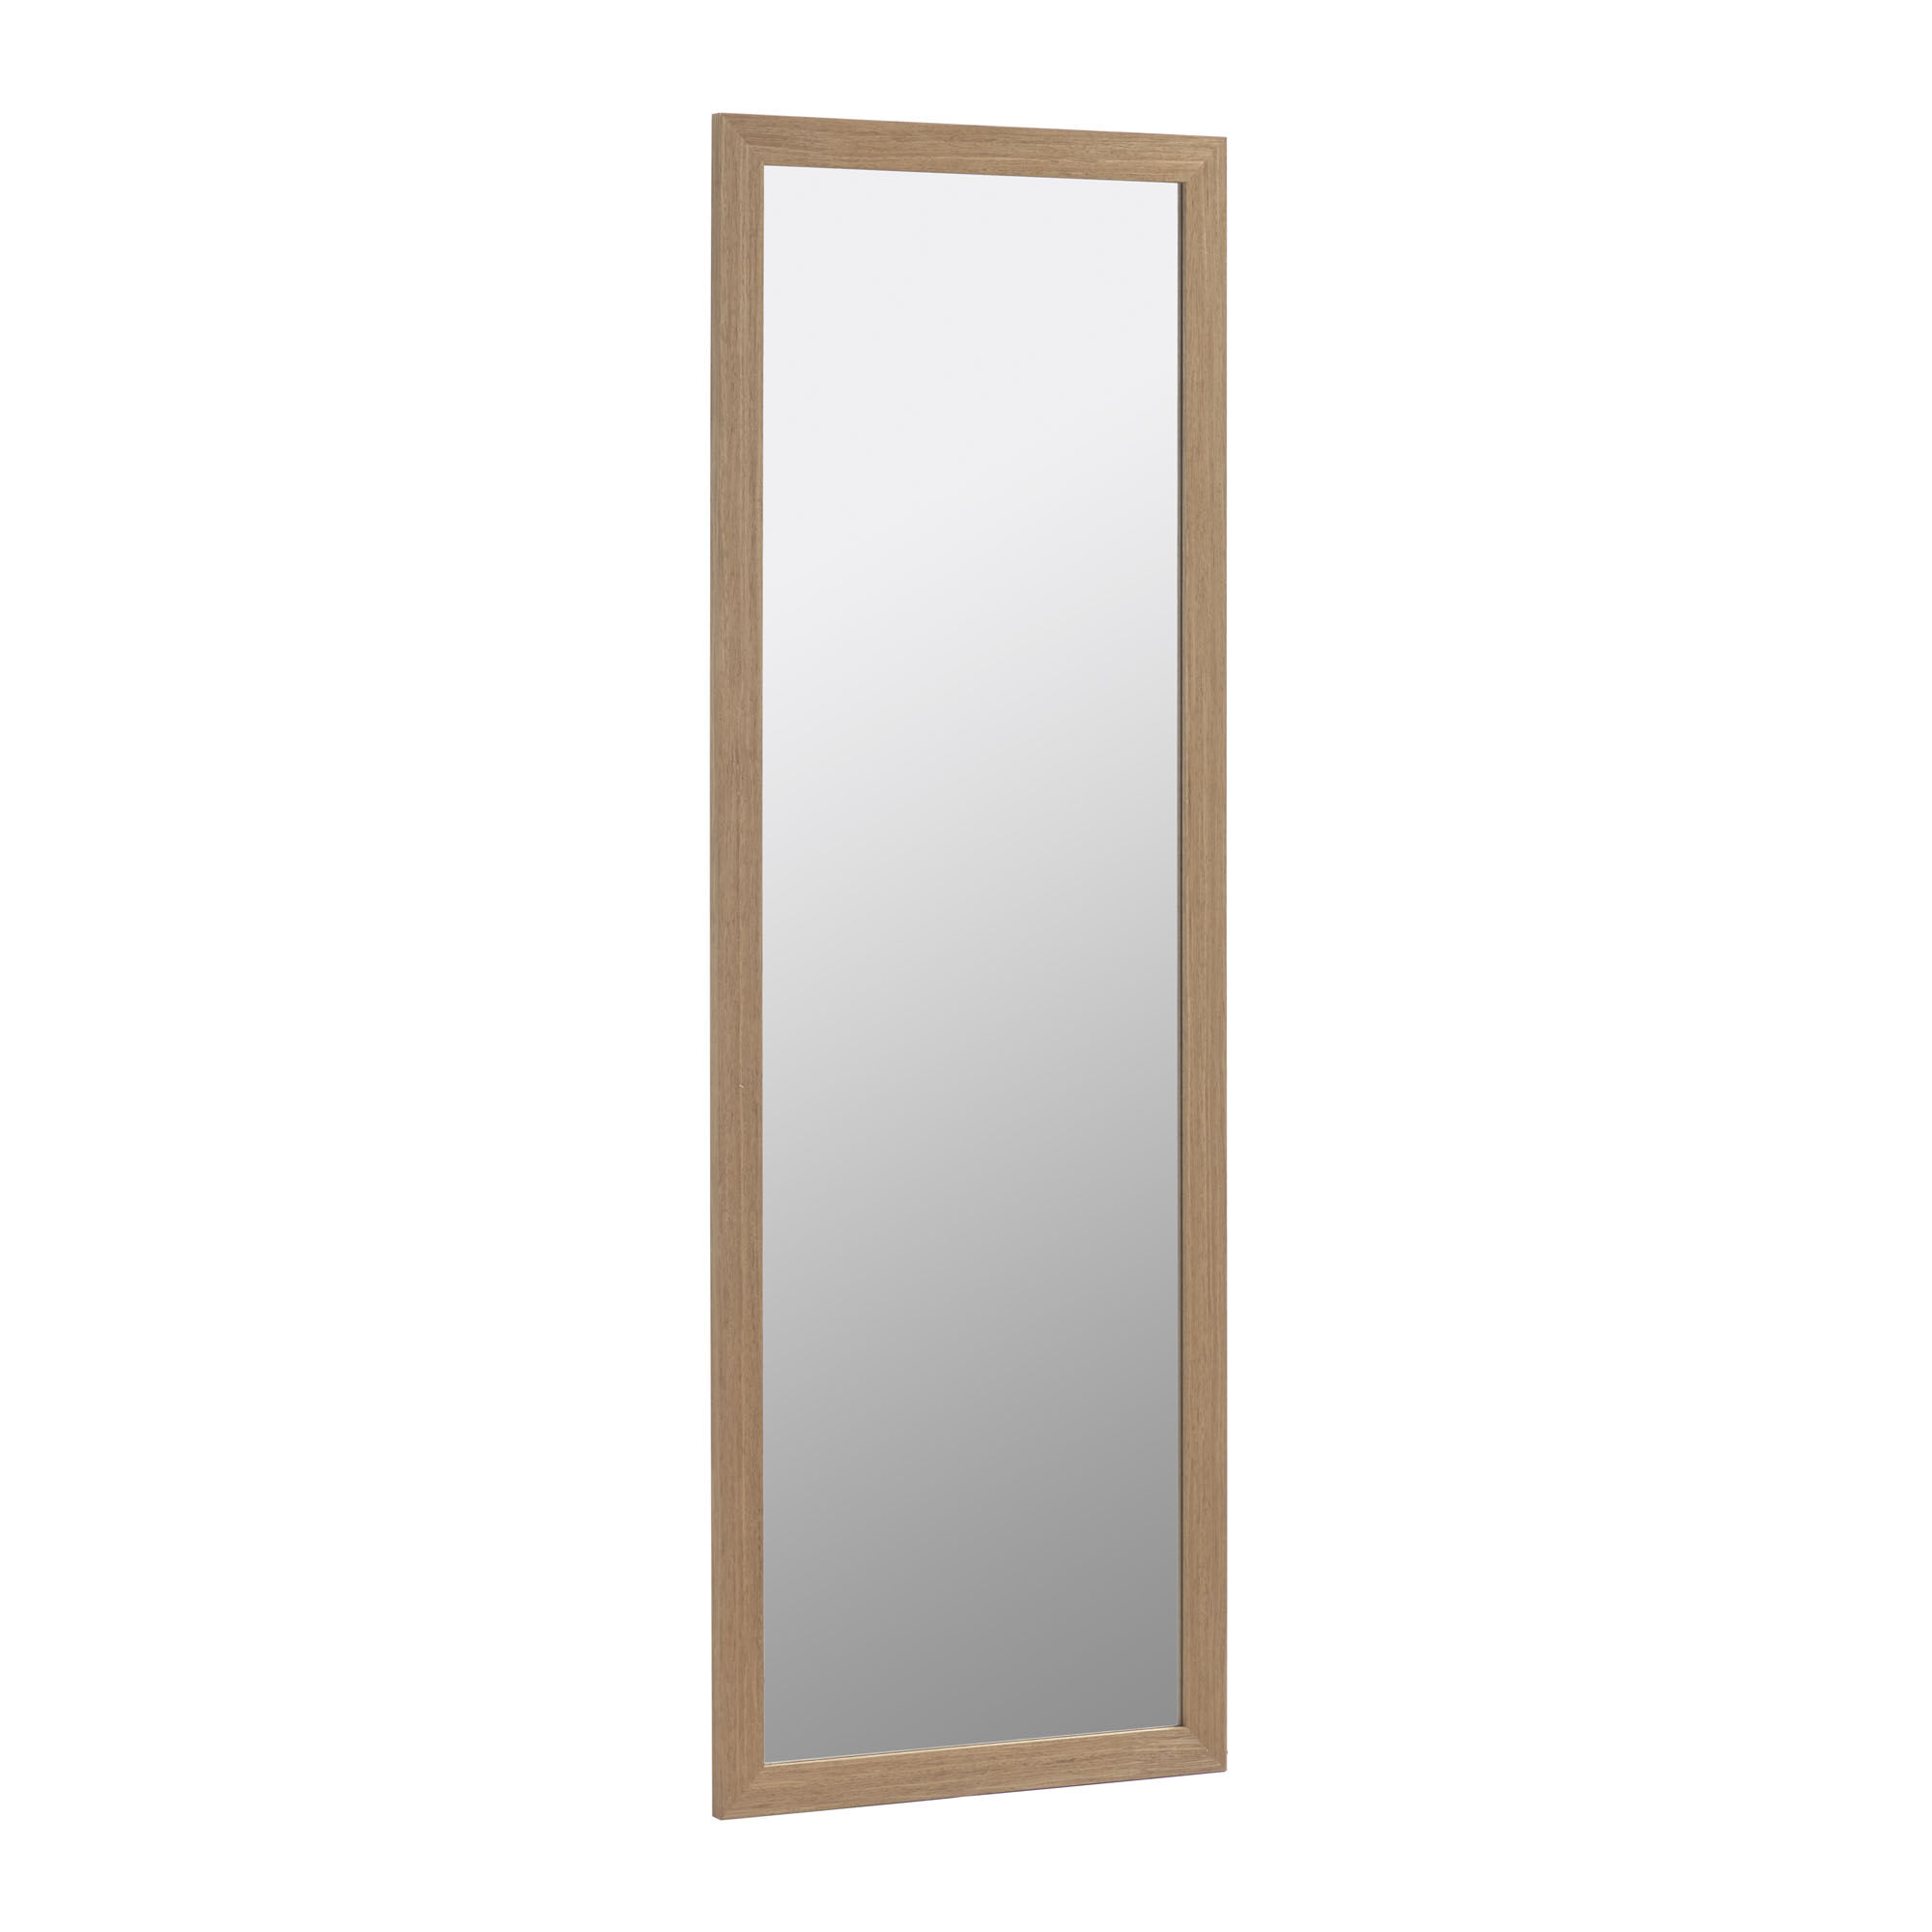 Kave Home Wilany with walnut finish mirror 52,5 x 152,5 cm